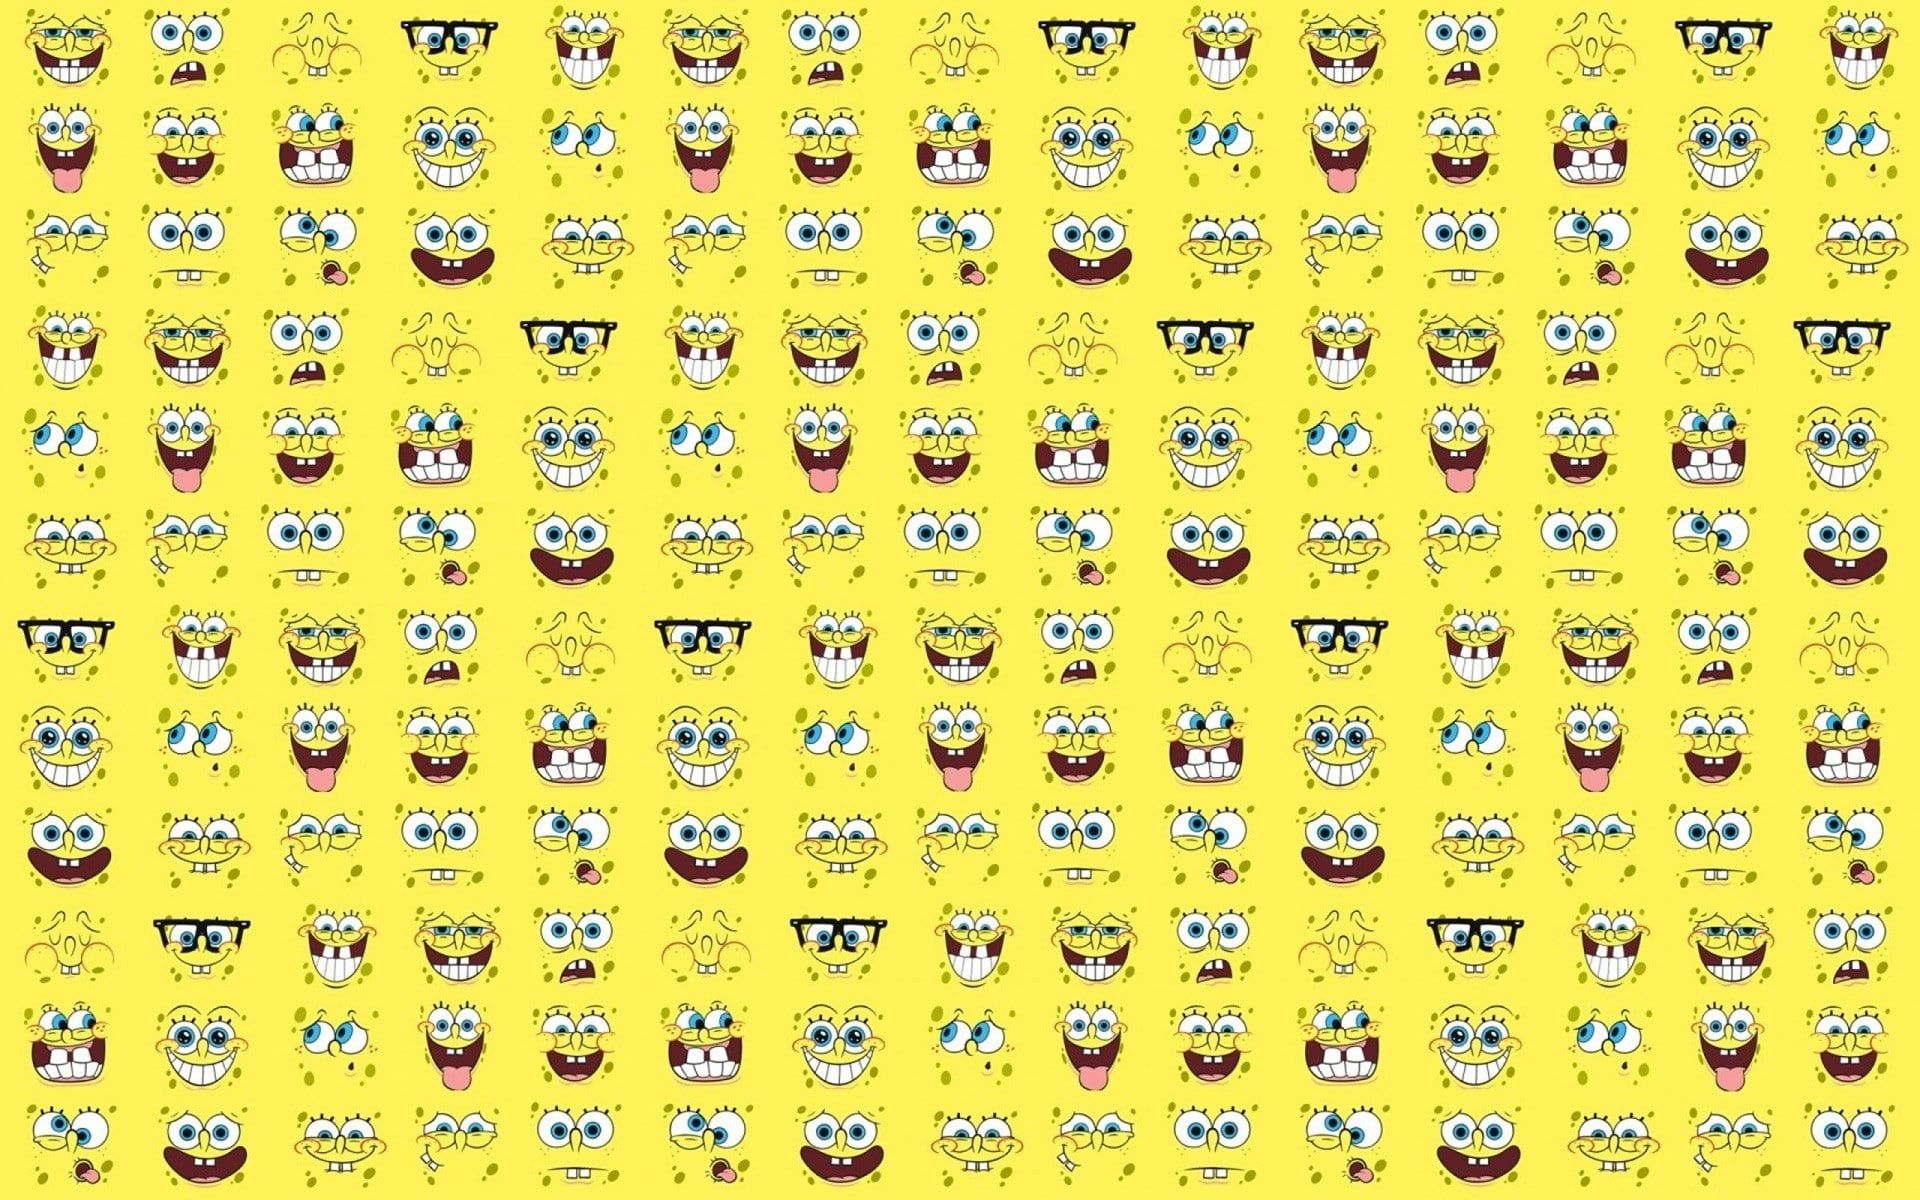 Spongebob wallpaper with many different expressions on a yellow background - SpongeBob